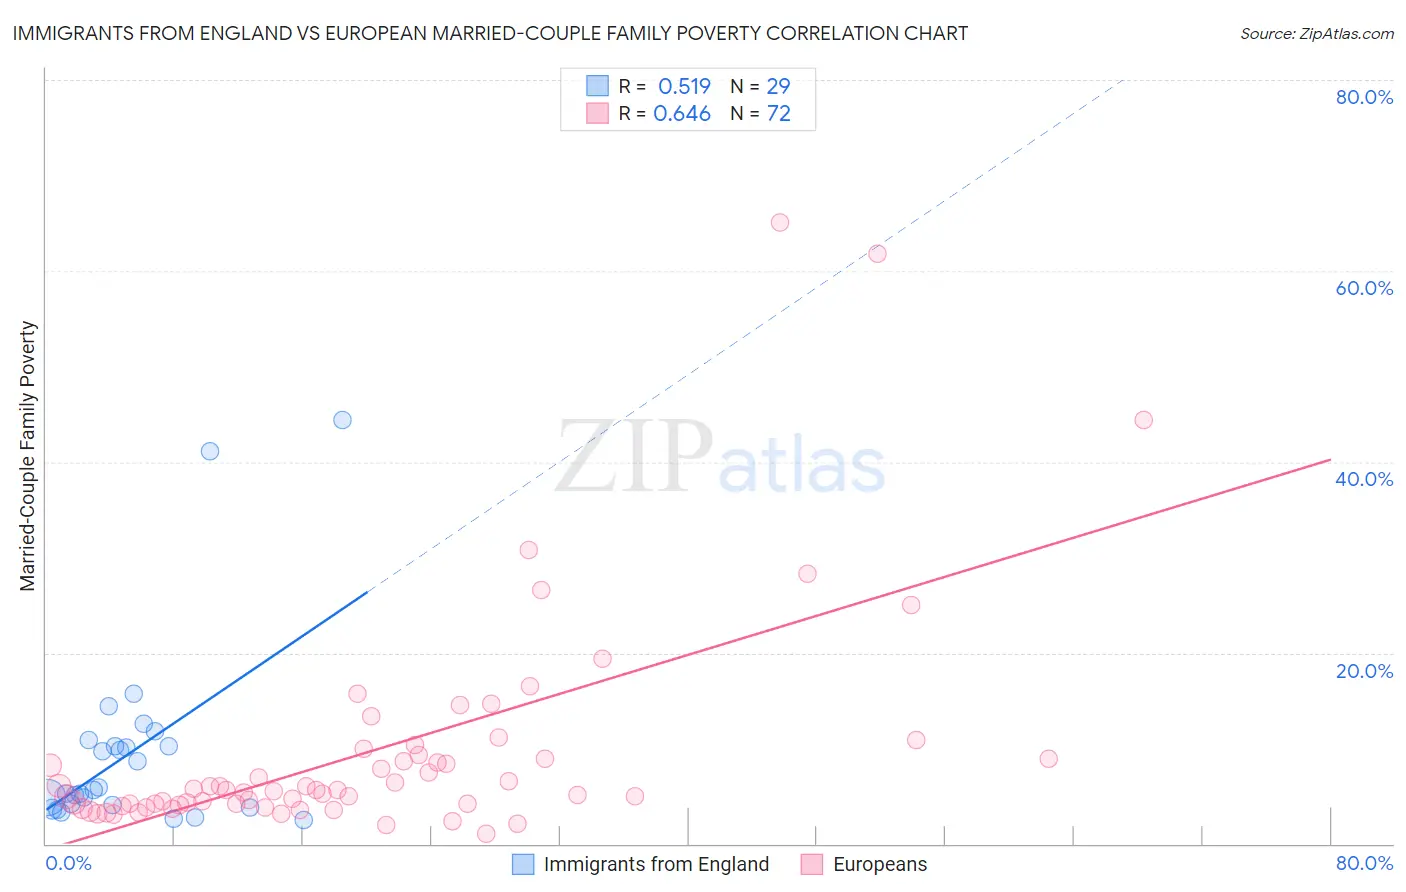 Immigrants from England vs European Married-Couple Family Poverty